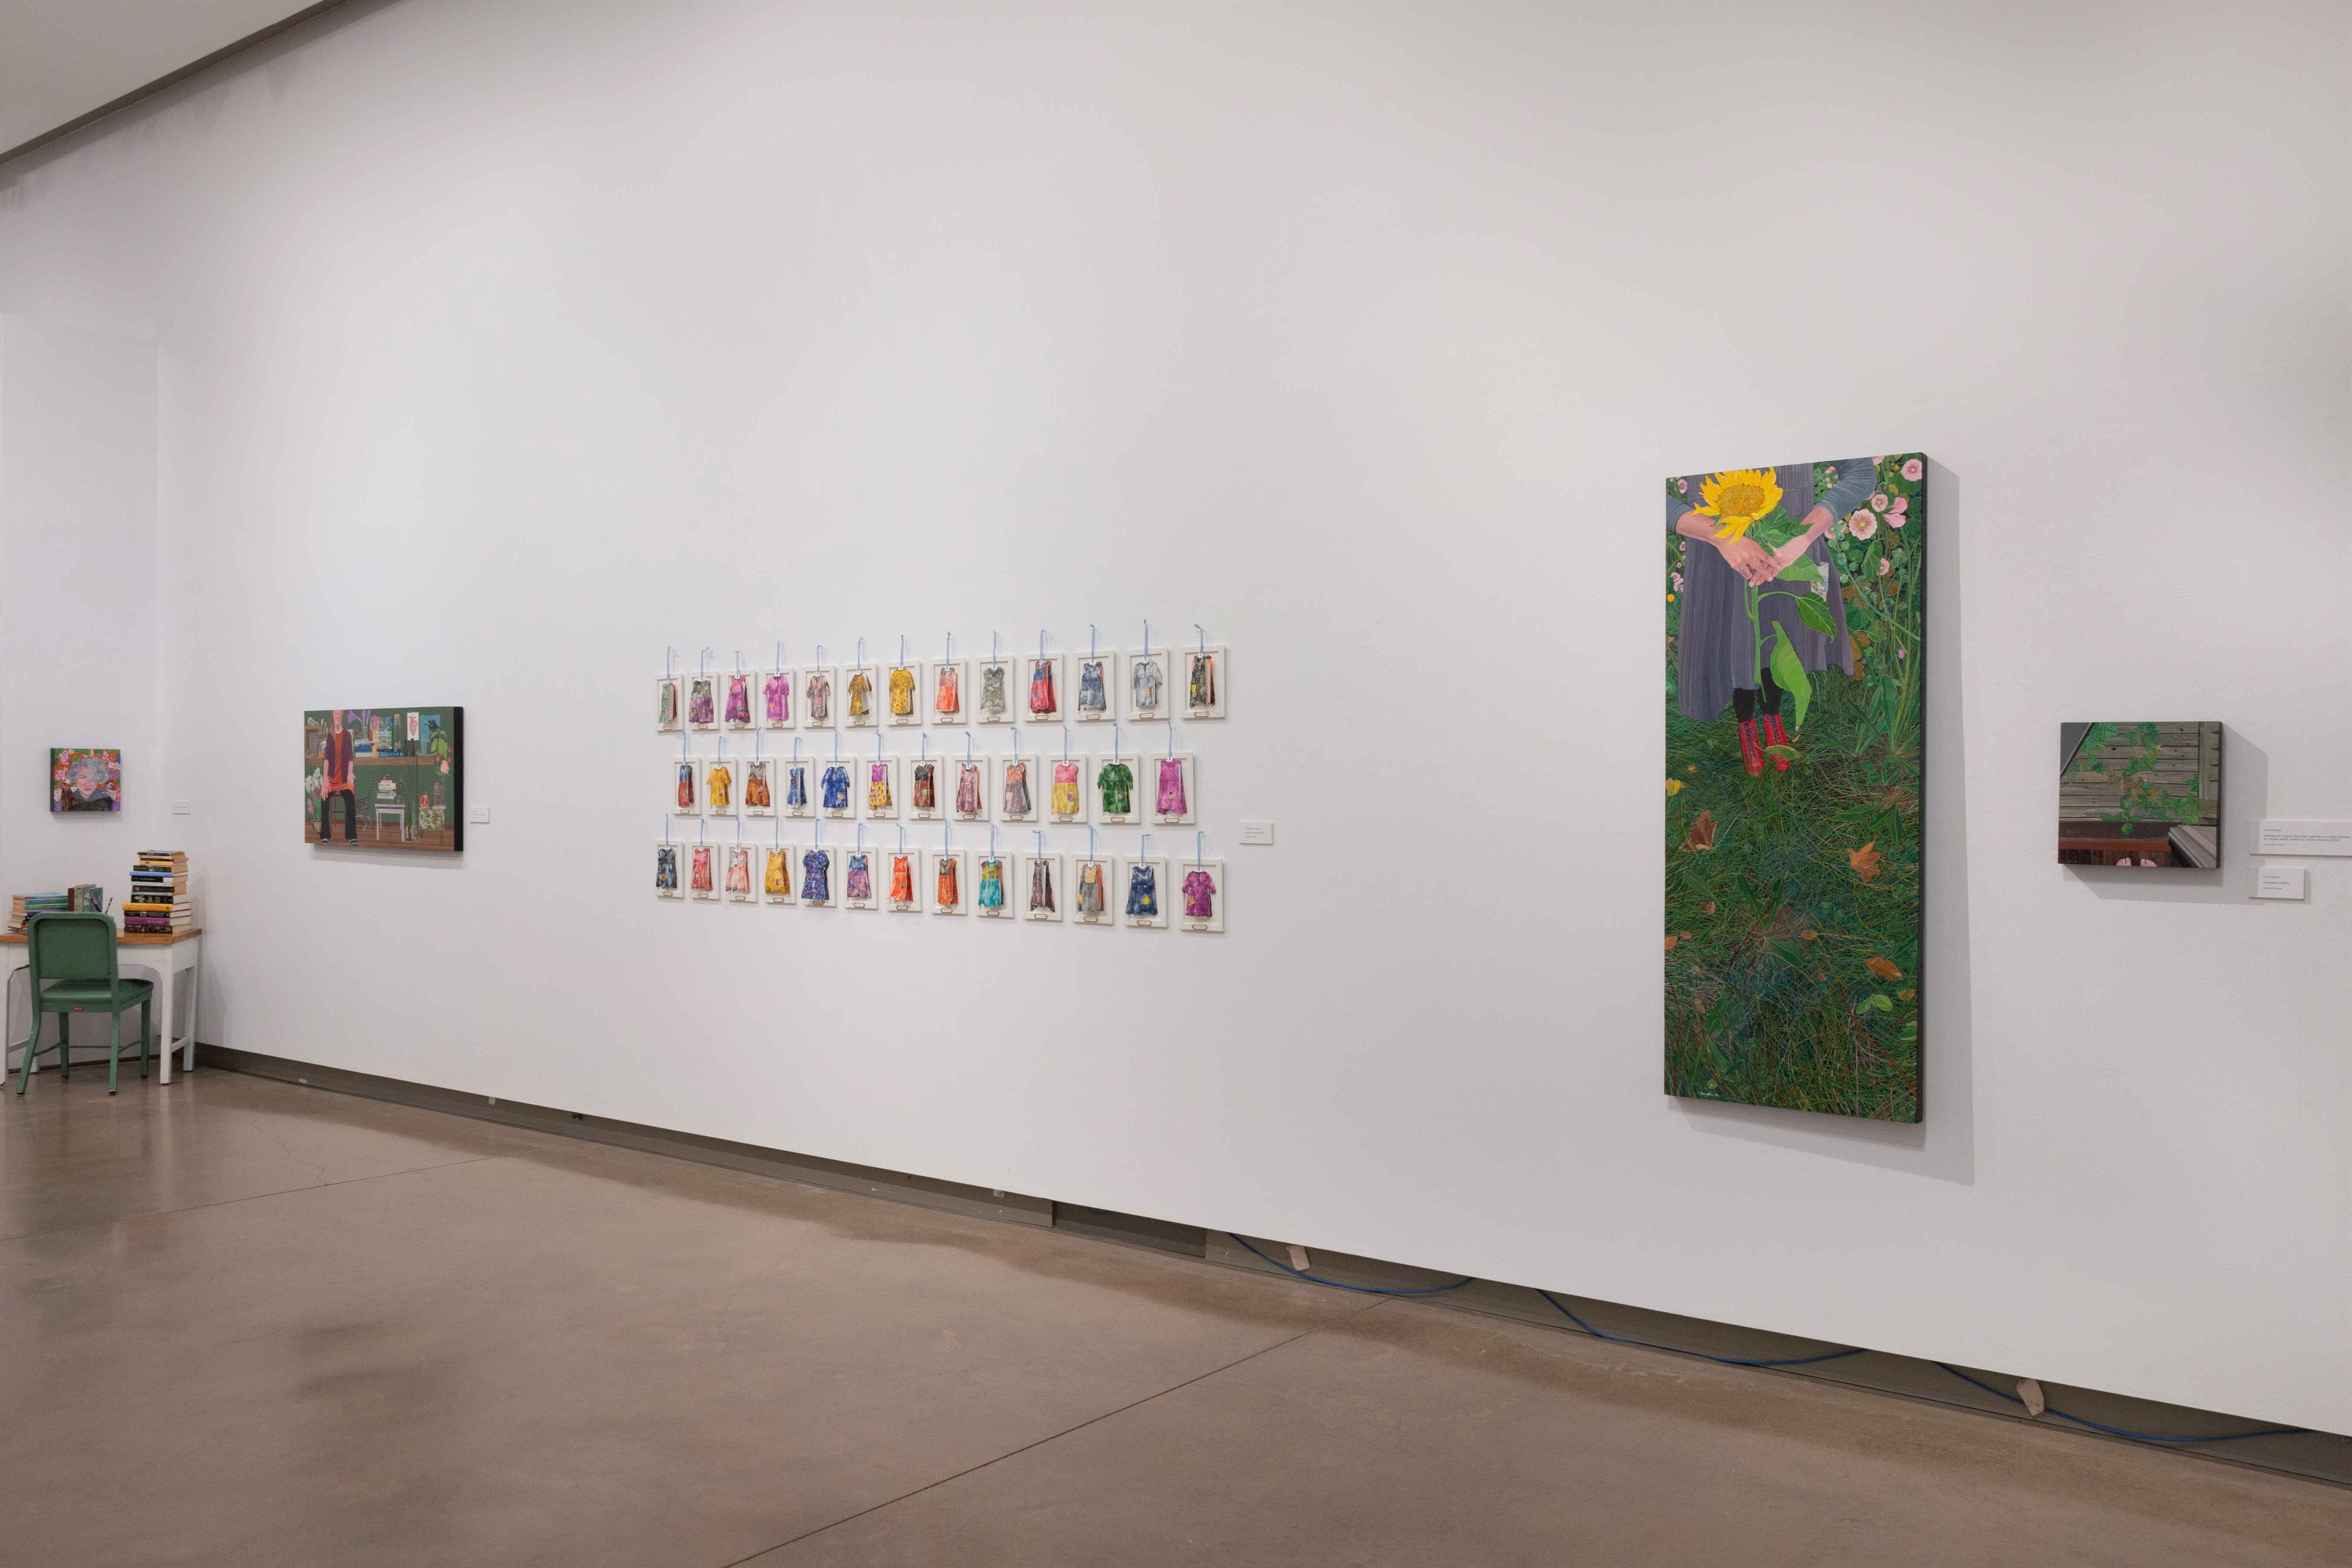 Installation view of watercolour grid of dresses flanked by paintings on either side